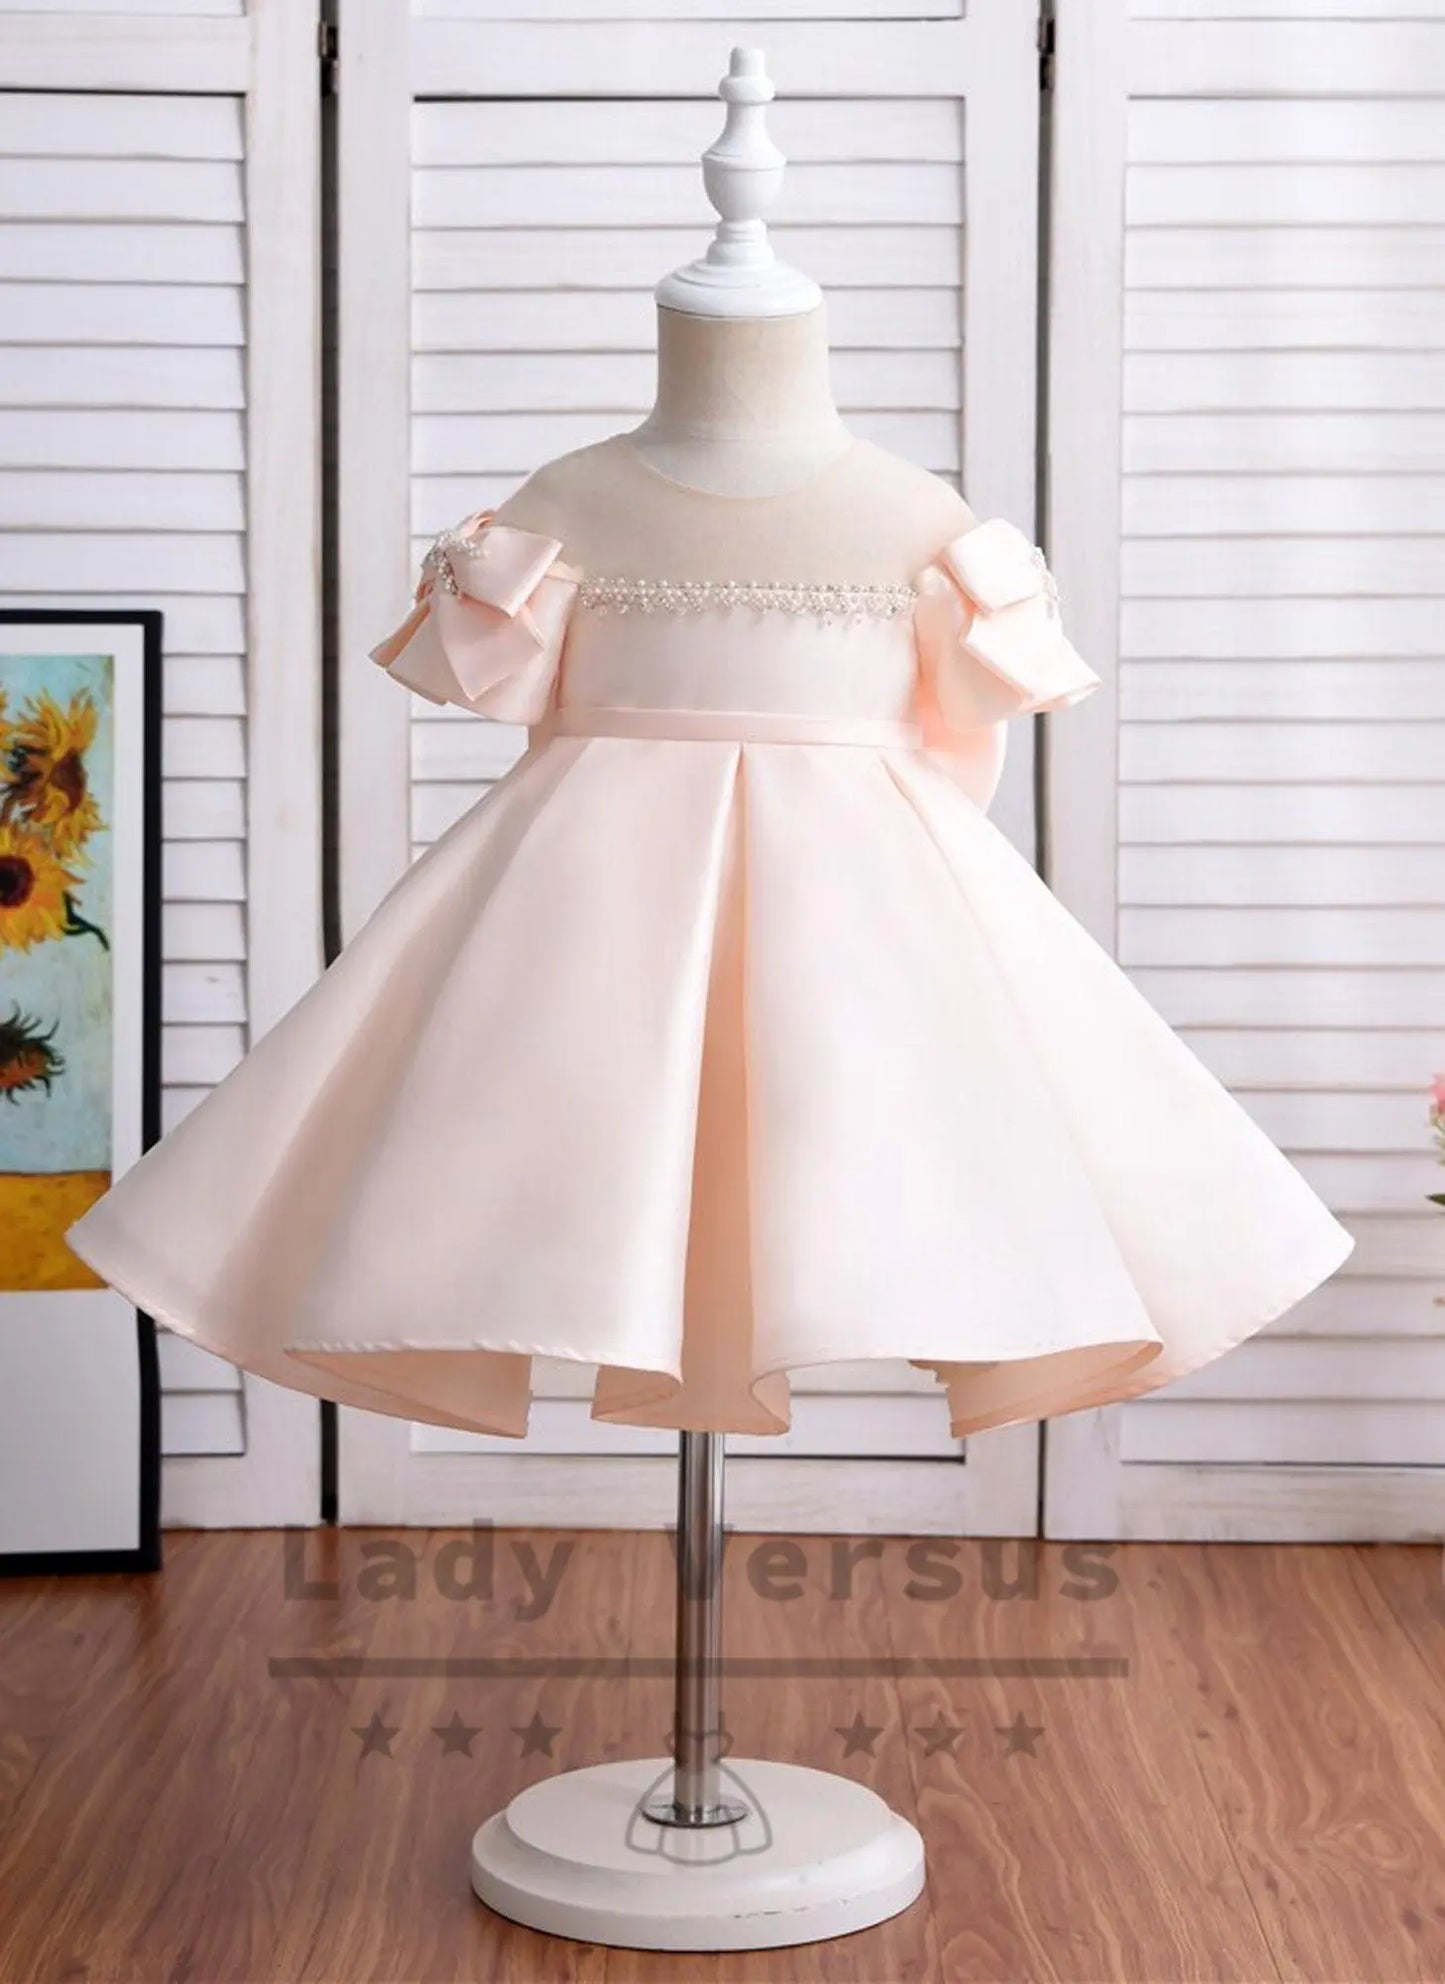 Baby Girl Baptism Dress  | Baby Girl Christening Gown | Baby Girl Baptism Outfit | birthday princess gown / toddler 1st birthday dress